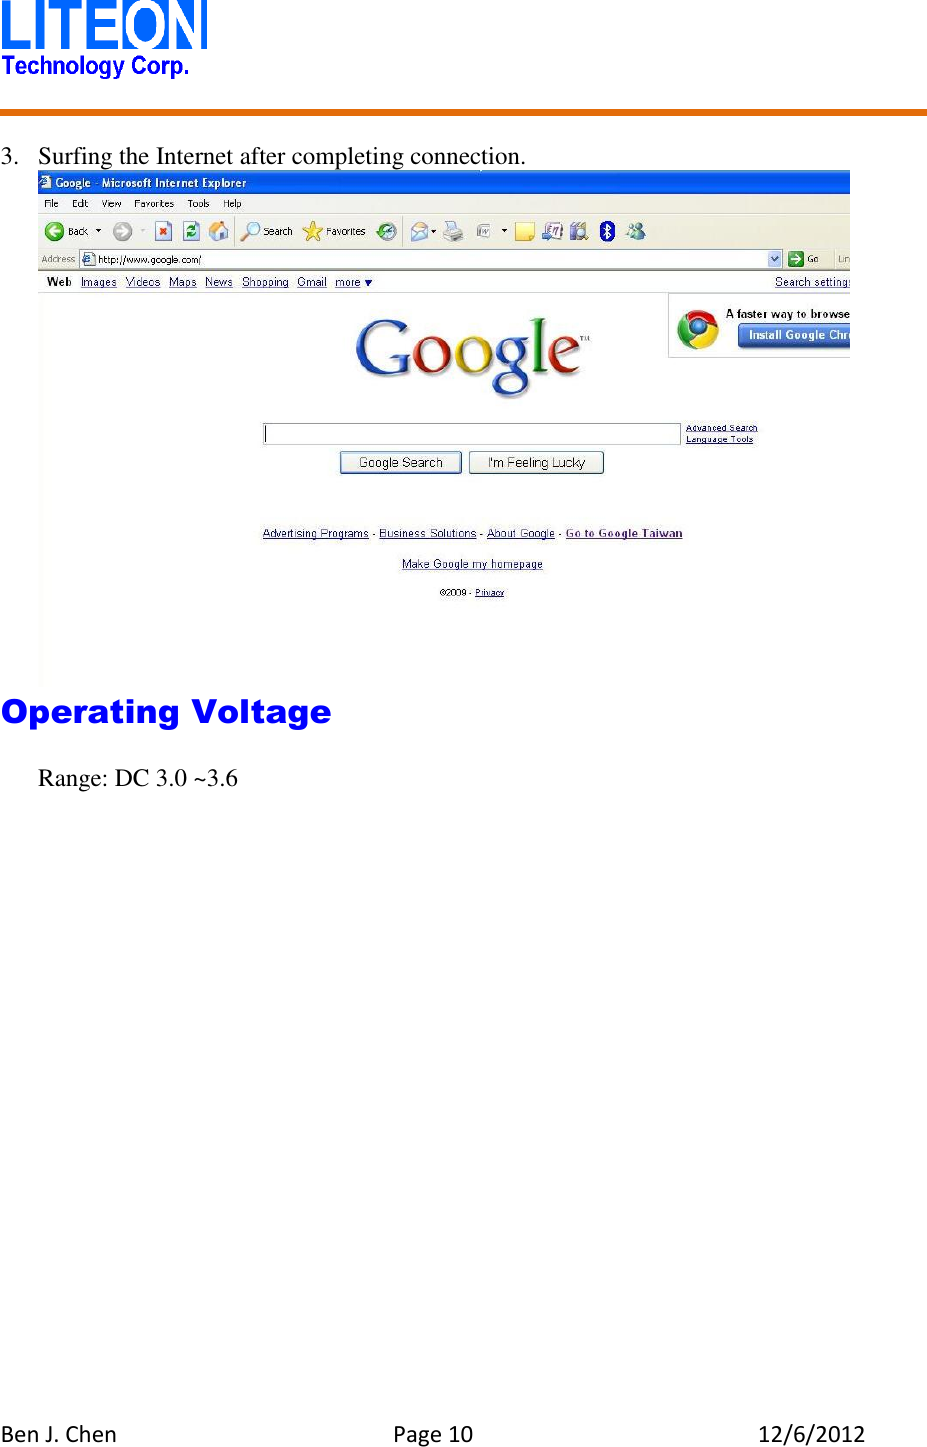   Ben J. Chen  Page 10  12/6/2012    3. Surfing the Internet after completing connection.  Operating Voltage    Range: DC 3.0 ~3.6 